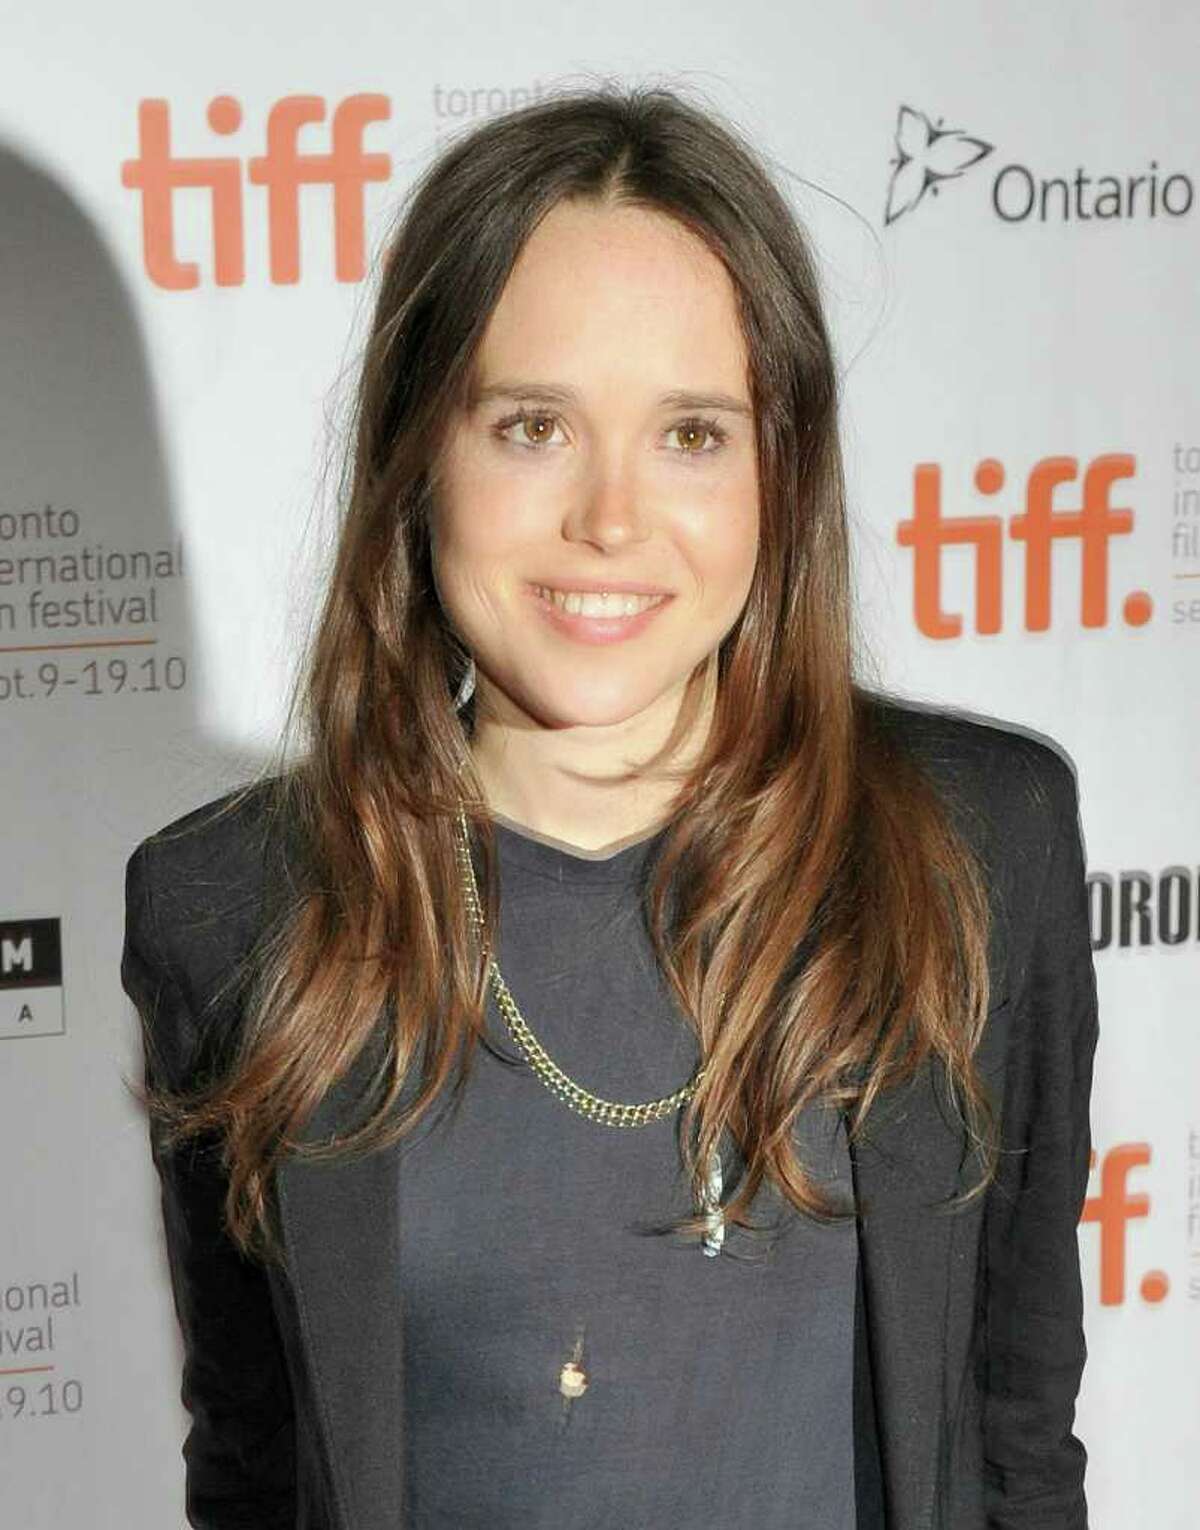 TORONTO, ON - SEPTEMBER 10: Actress Ellen Page attends the "Super" Premiere held at Ryerson Theatre during the 35th Toronto International Film Festival on September 10, 2010 in Toronto, Canada. (Photo by Sonia Recchia/Getty Images)